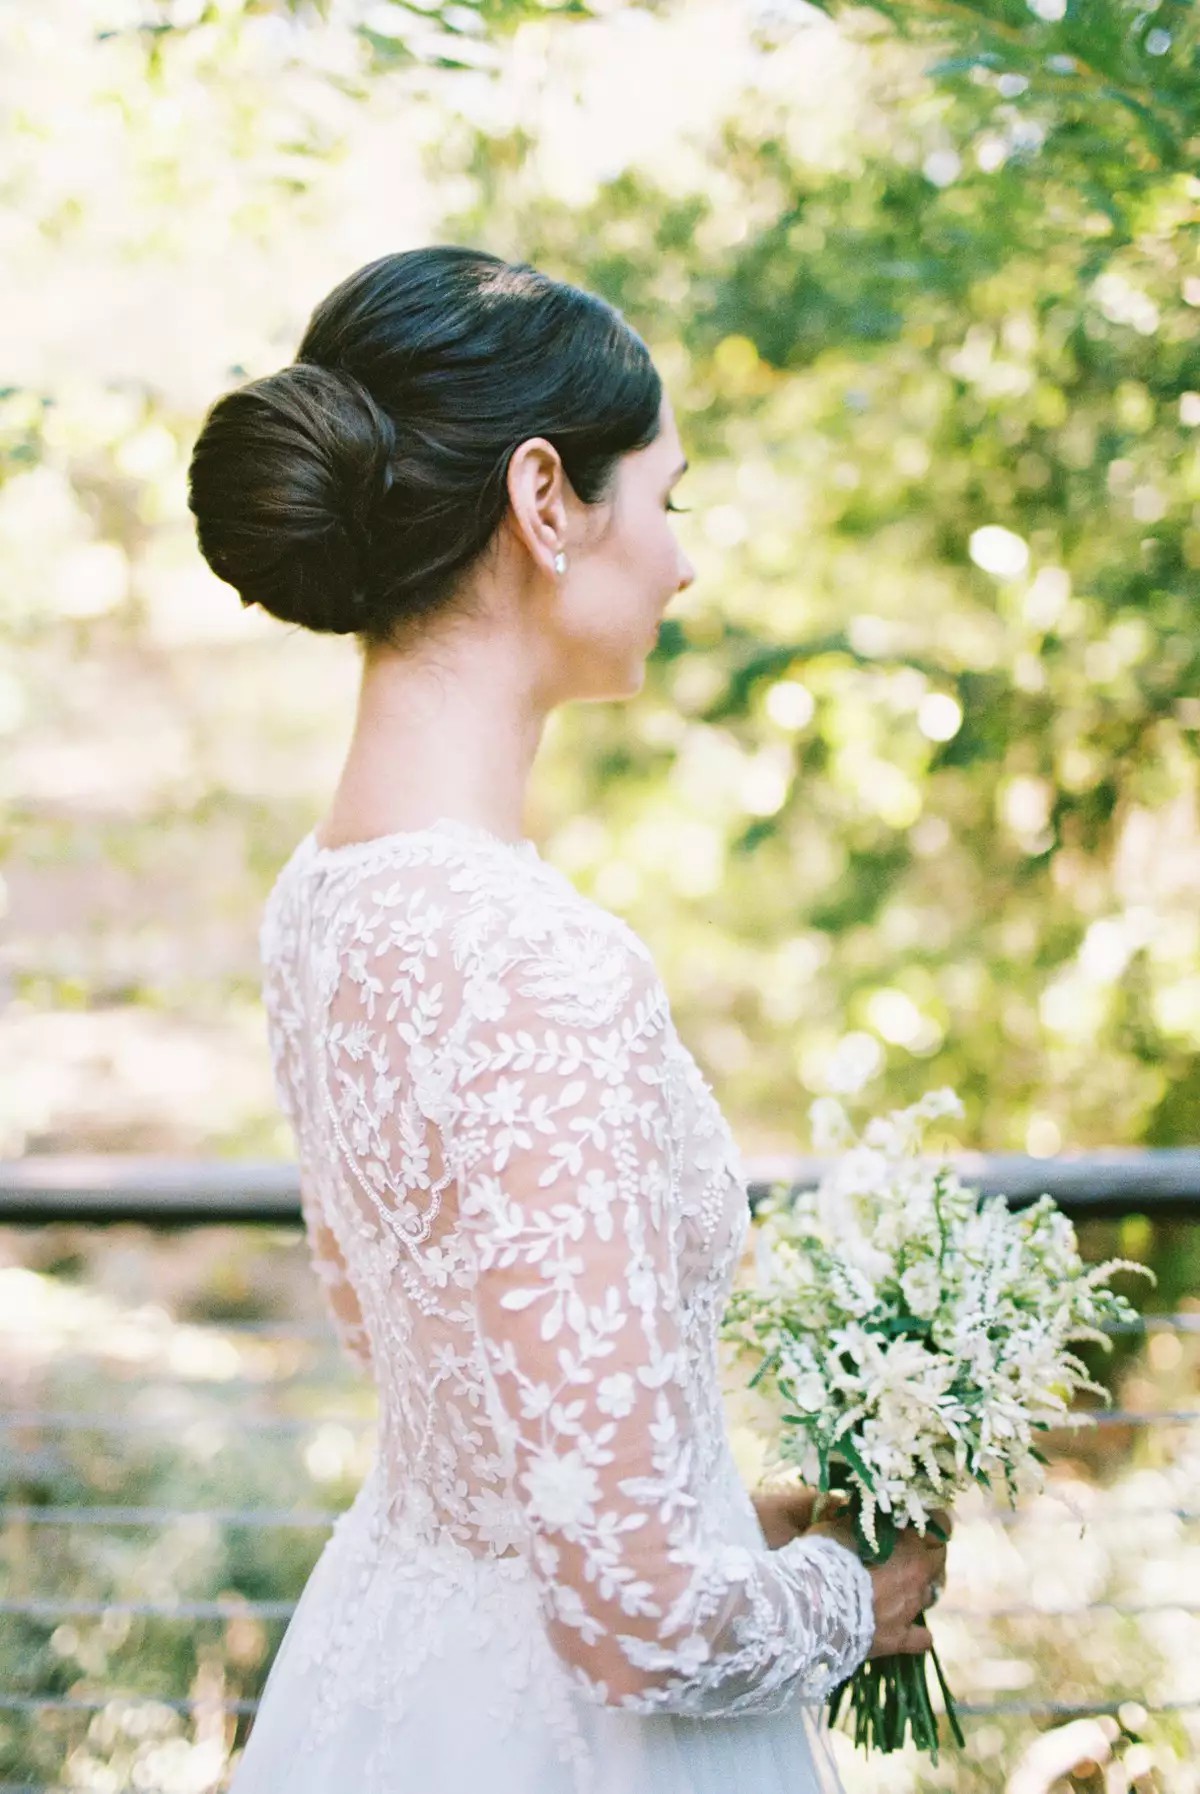 16 Beautiful Bridal Hairstyle Ideas To Match Your Wedding Dress Neckline